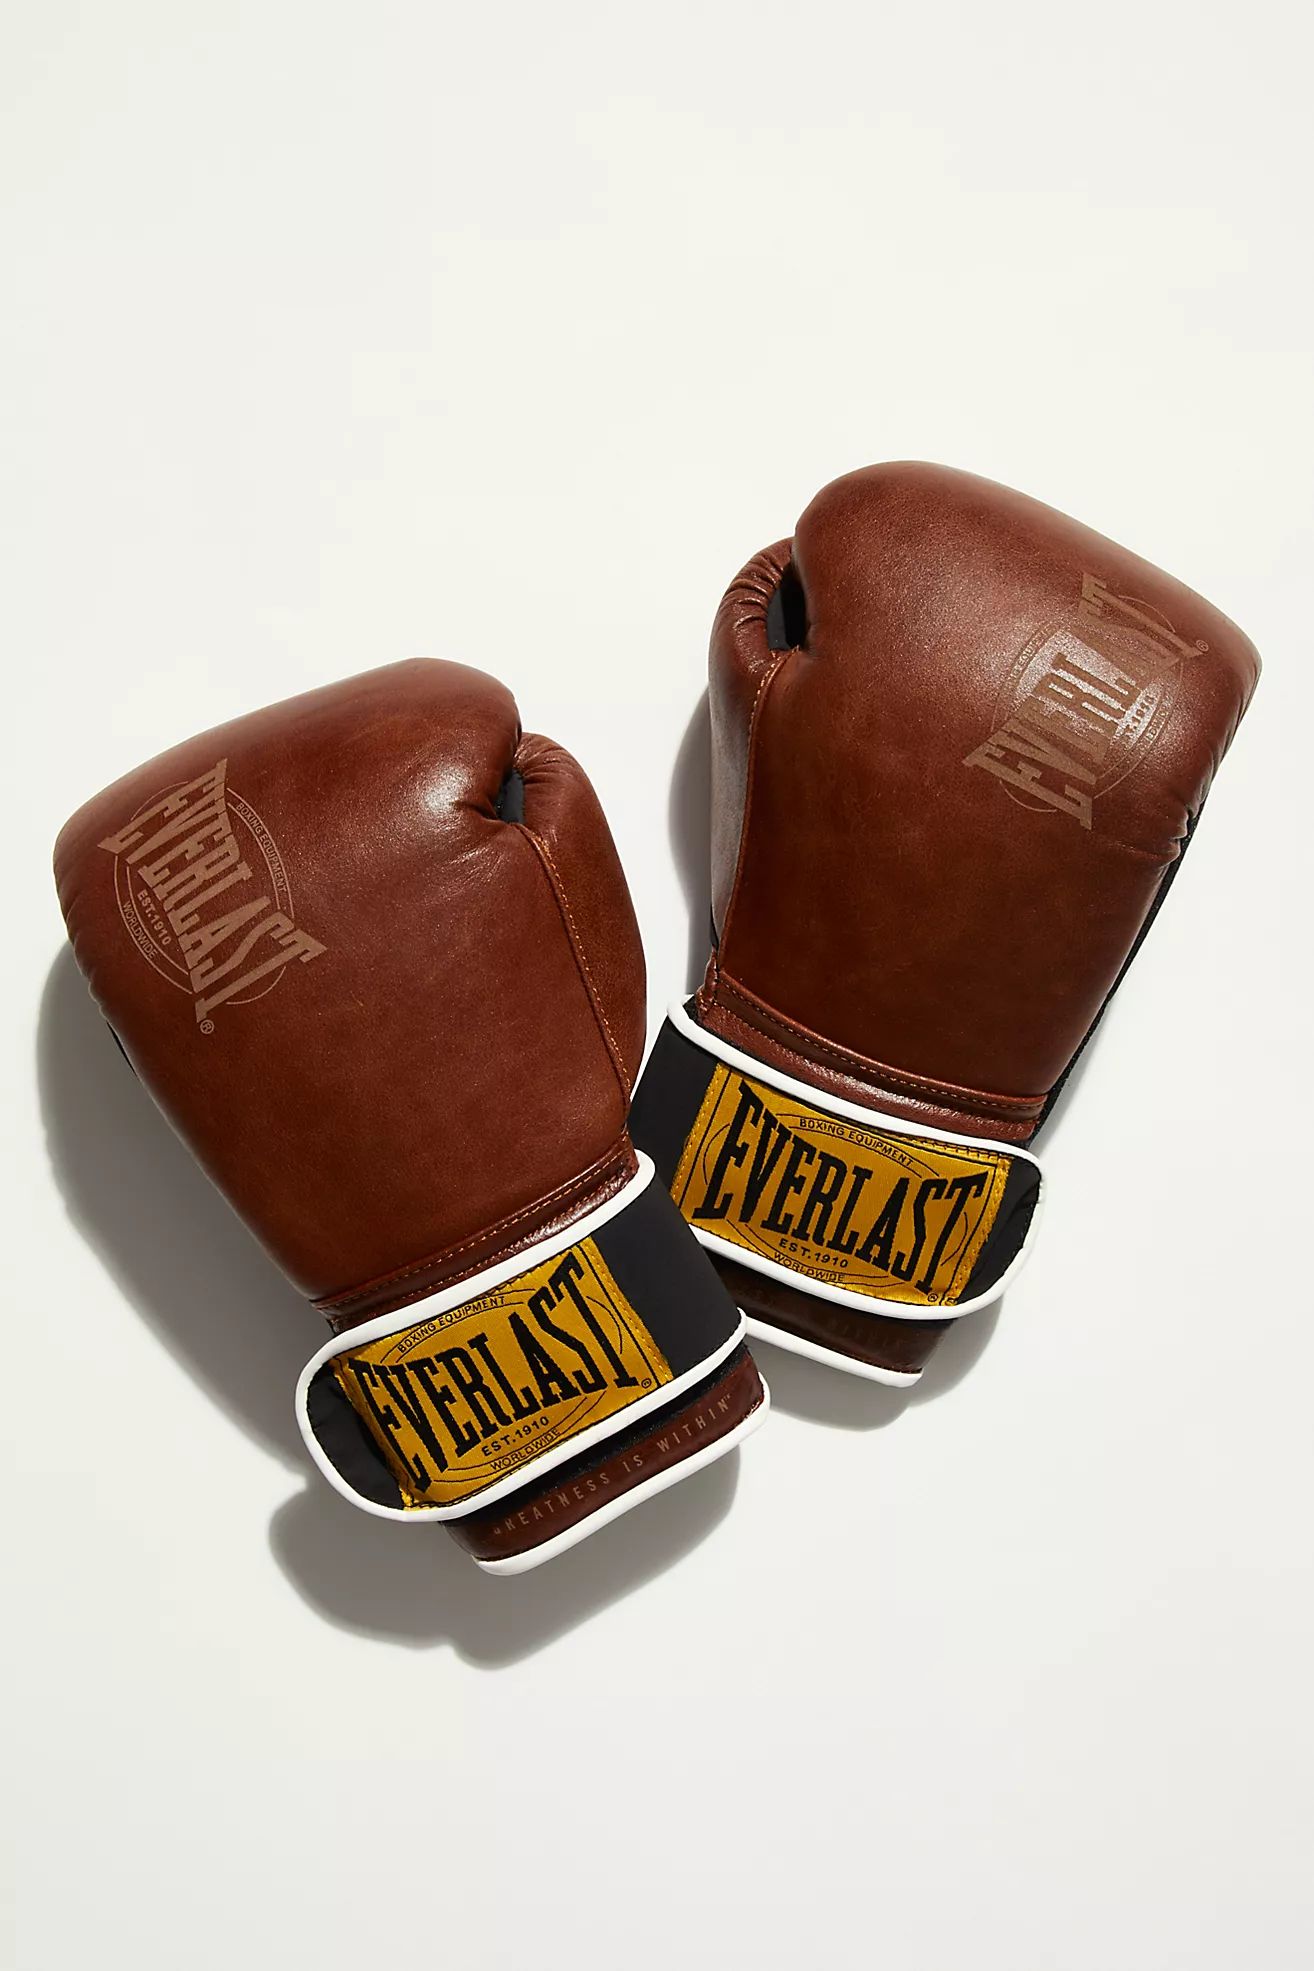 Everlast 1910 Boxing Gloves | Free People (Global - UK&FR Excluded)